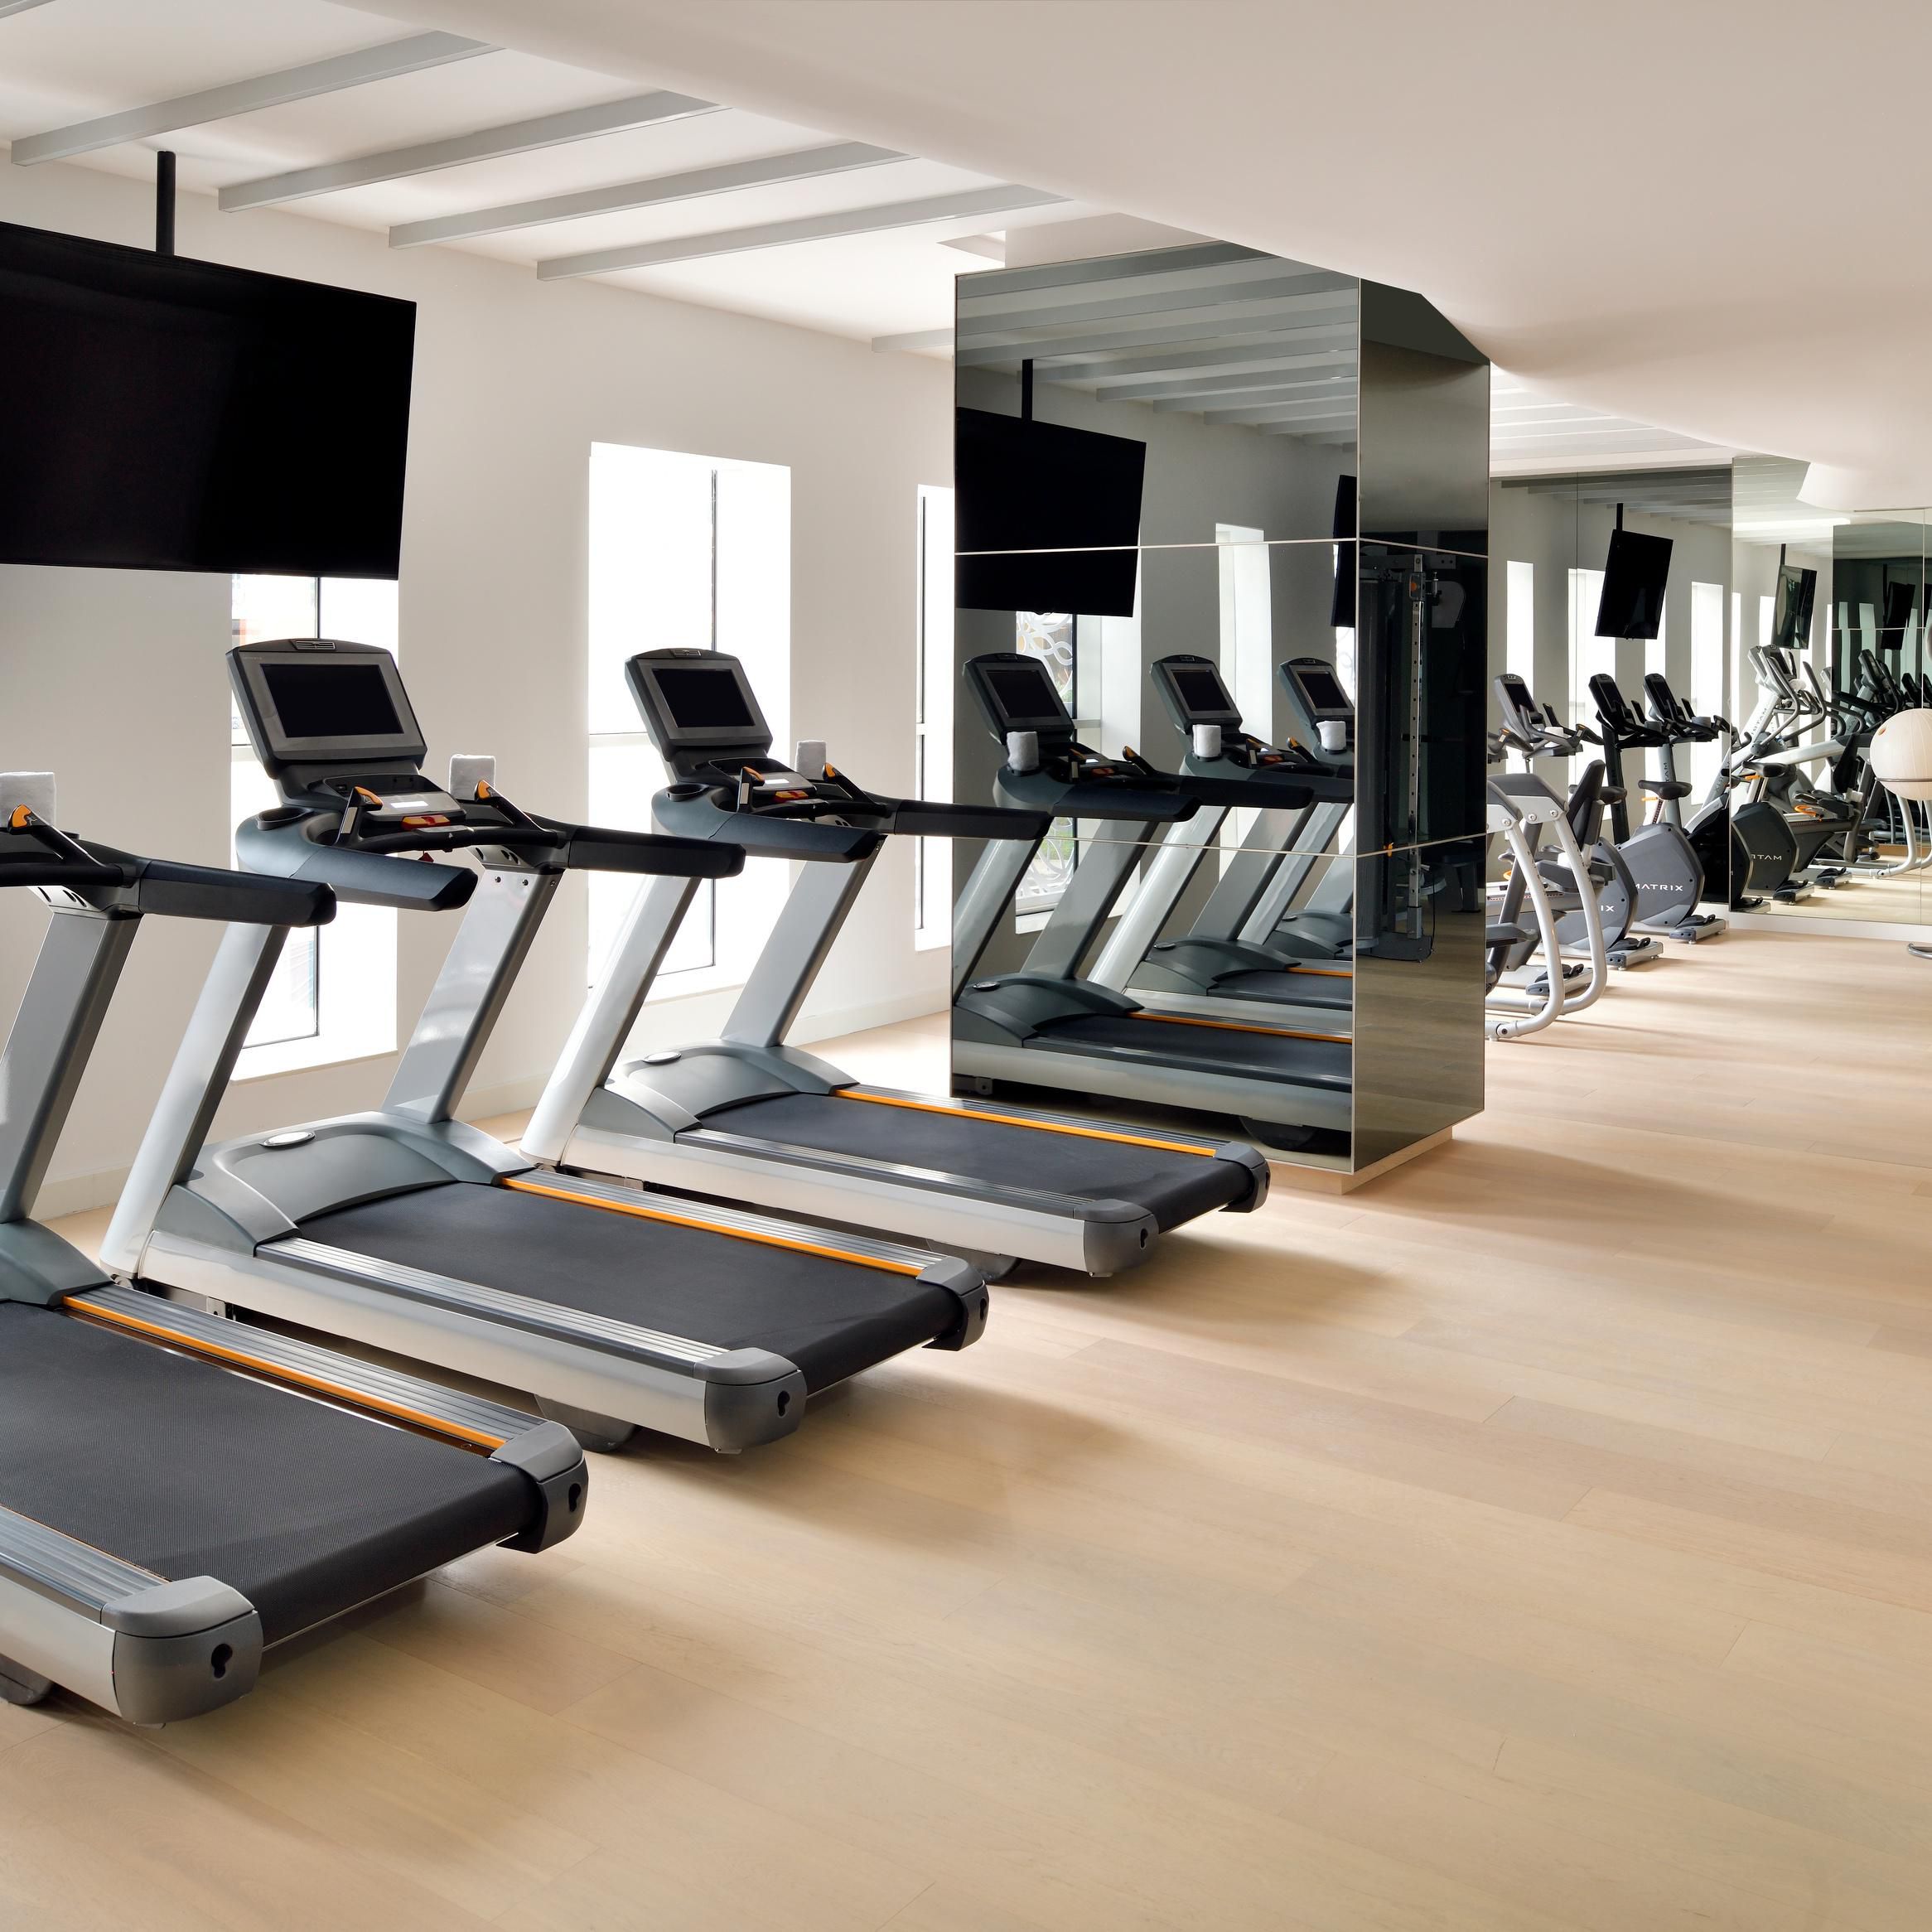  Fully equipped state-of-the-art gymnasium open 24/7